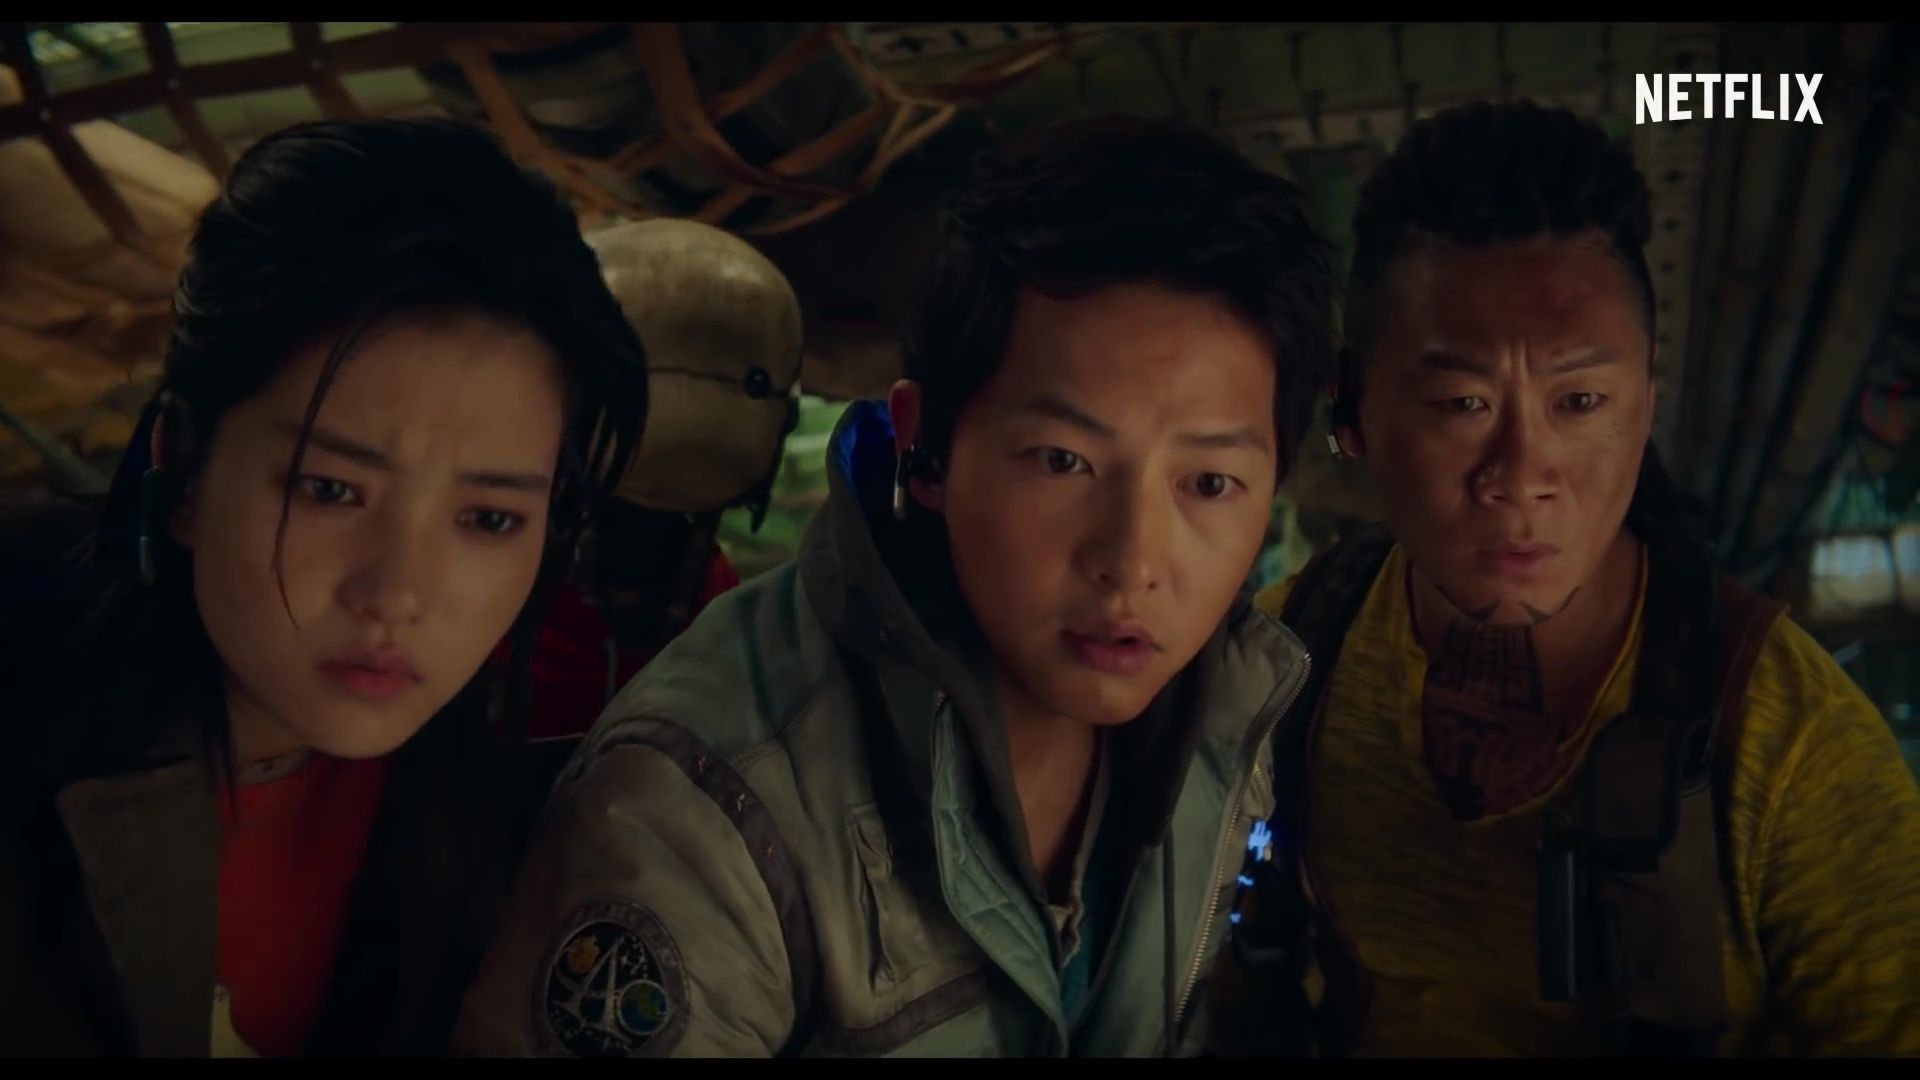 Video Released for the Upcoming Korean Movie Space Sweepers